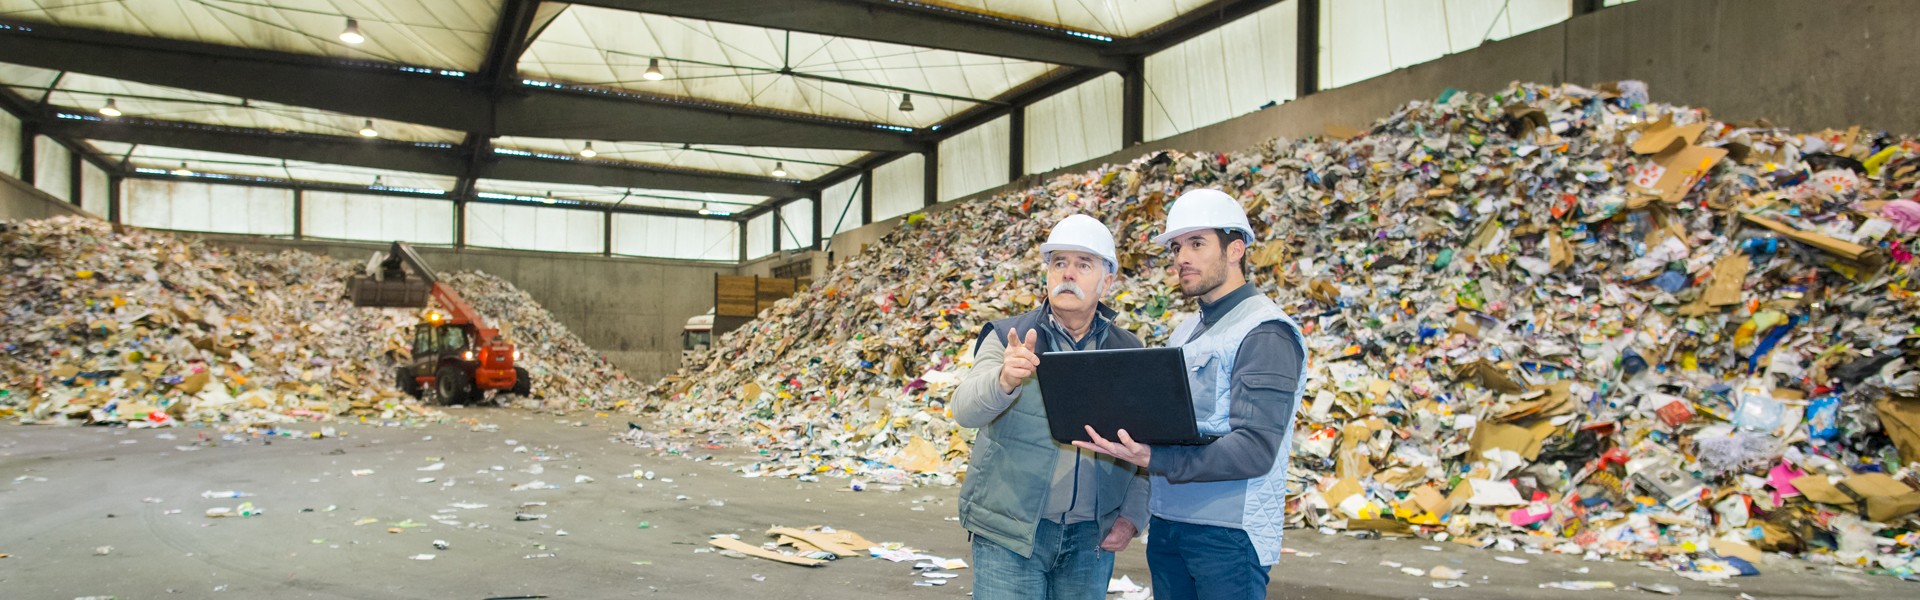 We provide consultations, feasibility studies & due diligence services for waste management.